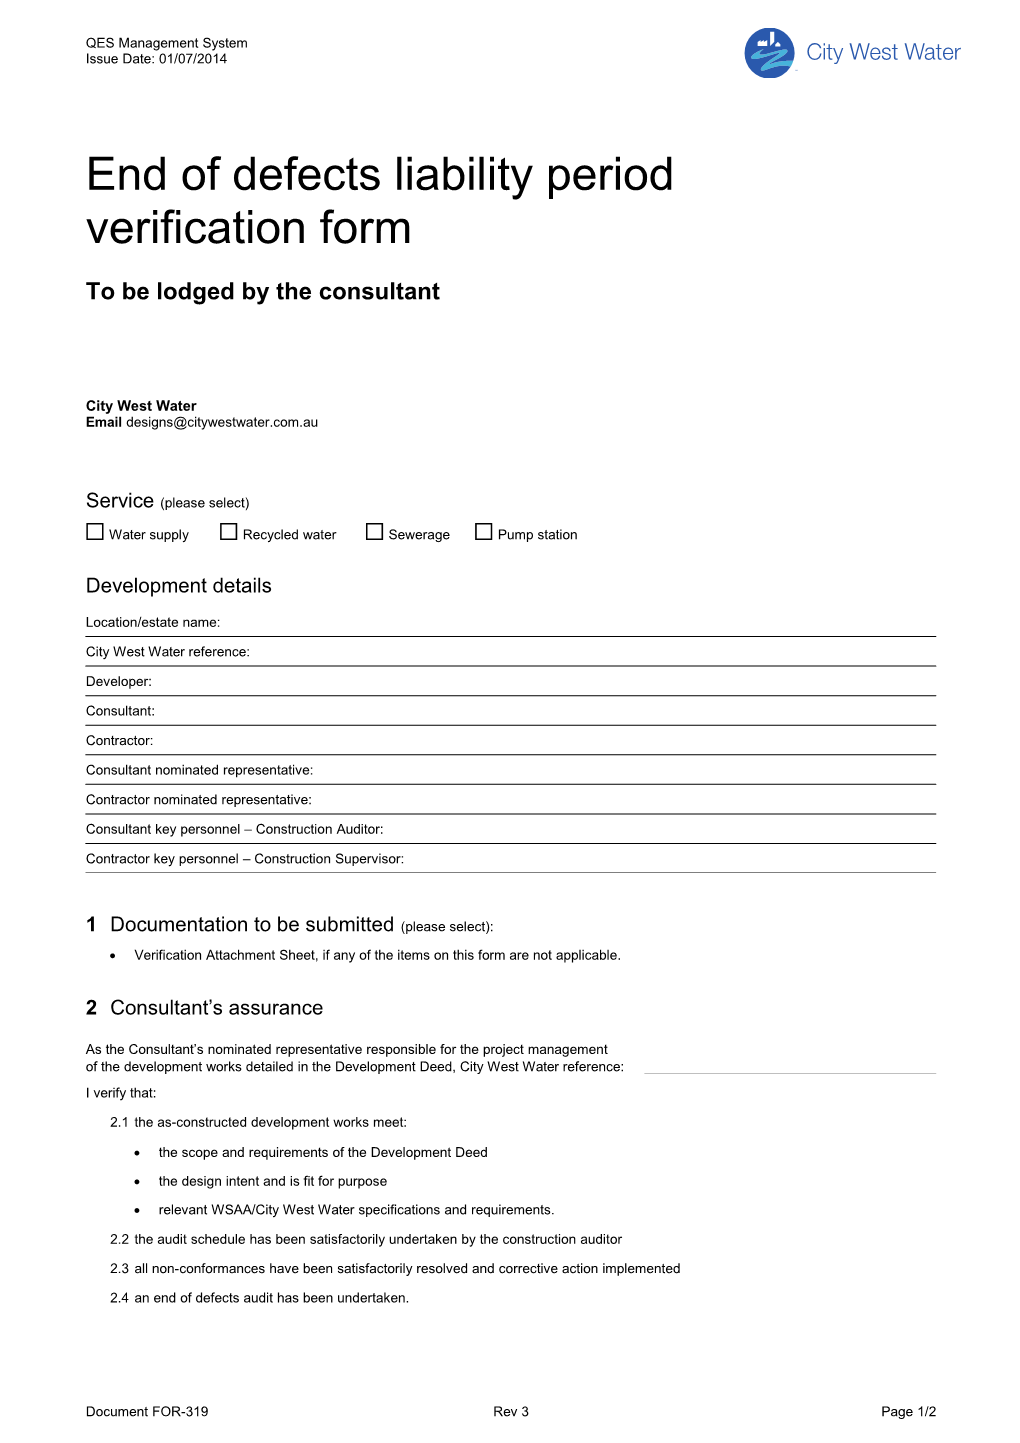 End of Defects Liability Period Verification Form